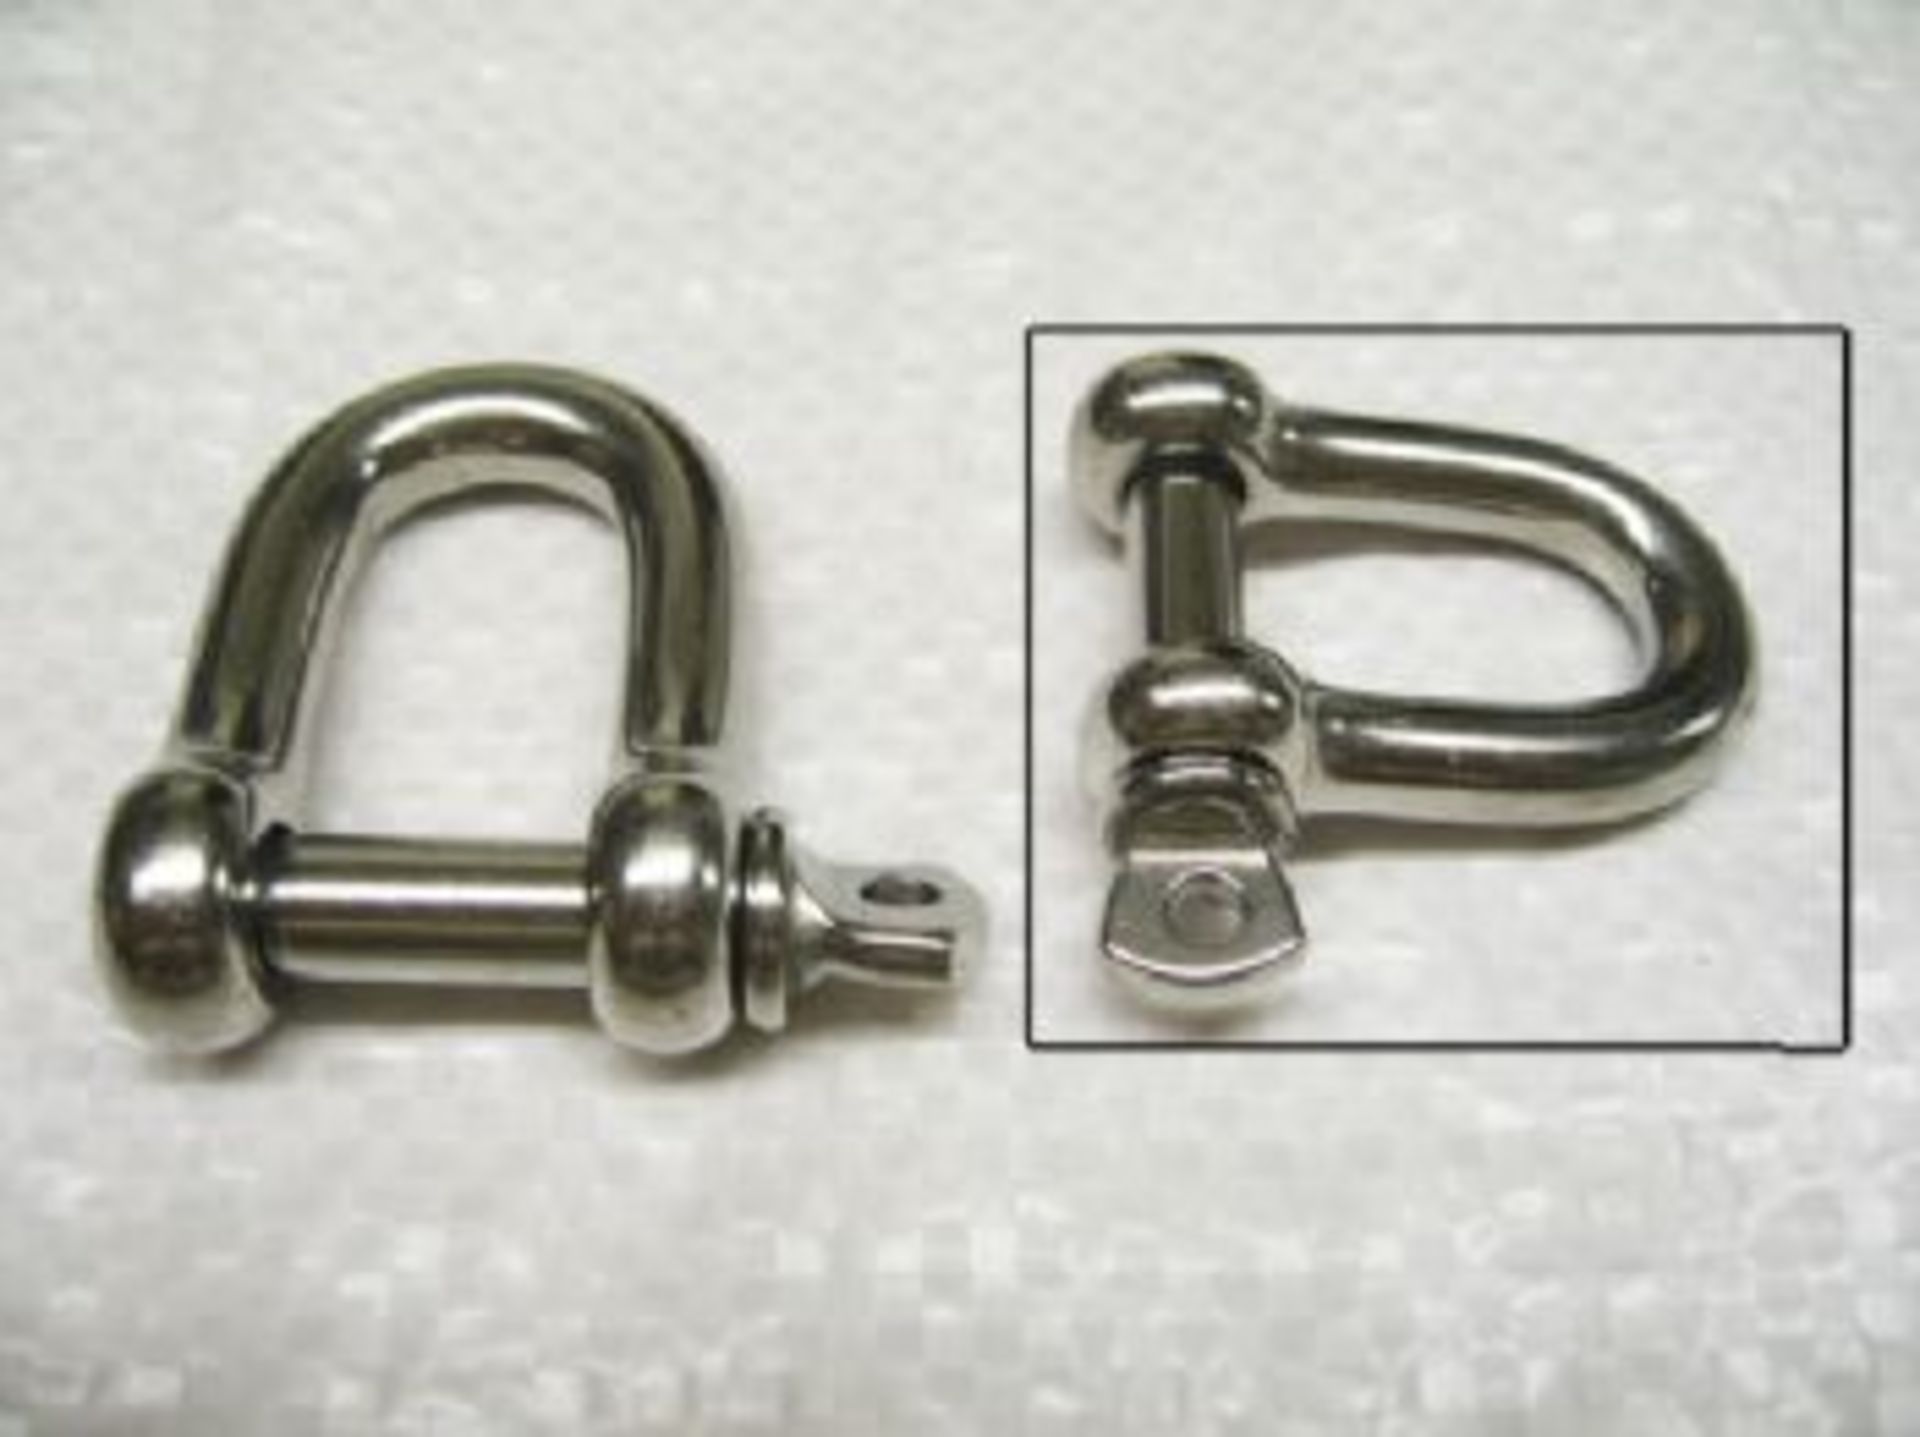 10PCS X 6MM STAINLESS STEEL Dee Shackle With Screw Collar Pin - BRAND NEW
Shackle And Pin DIA - 6MM